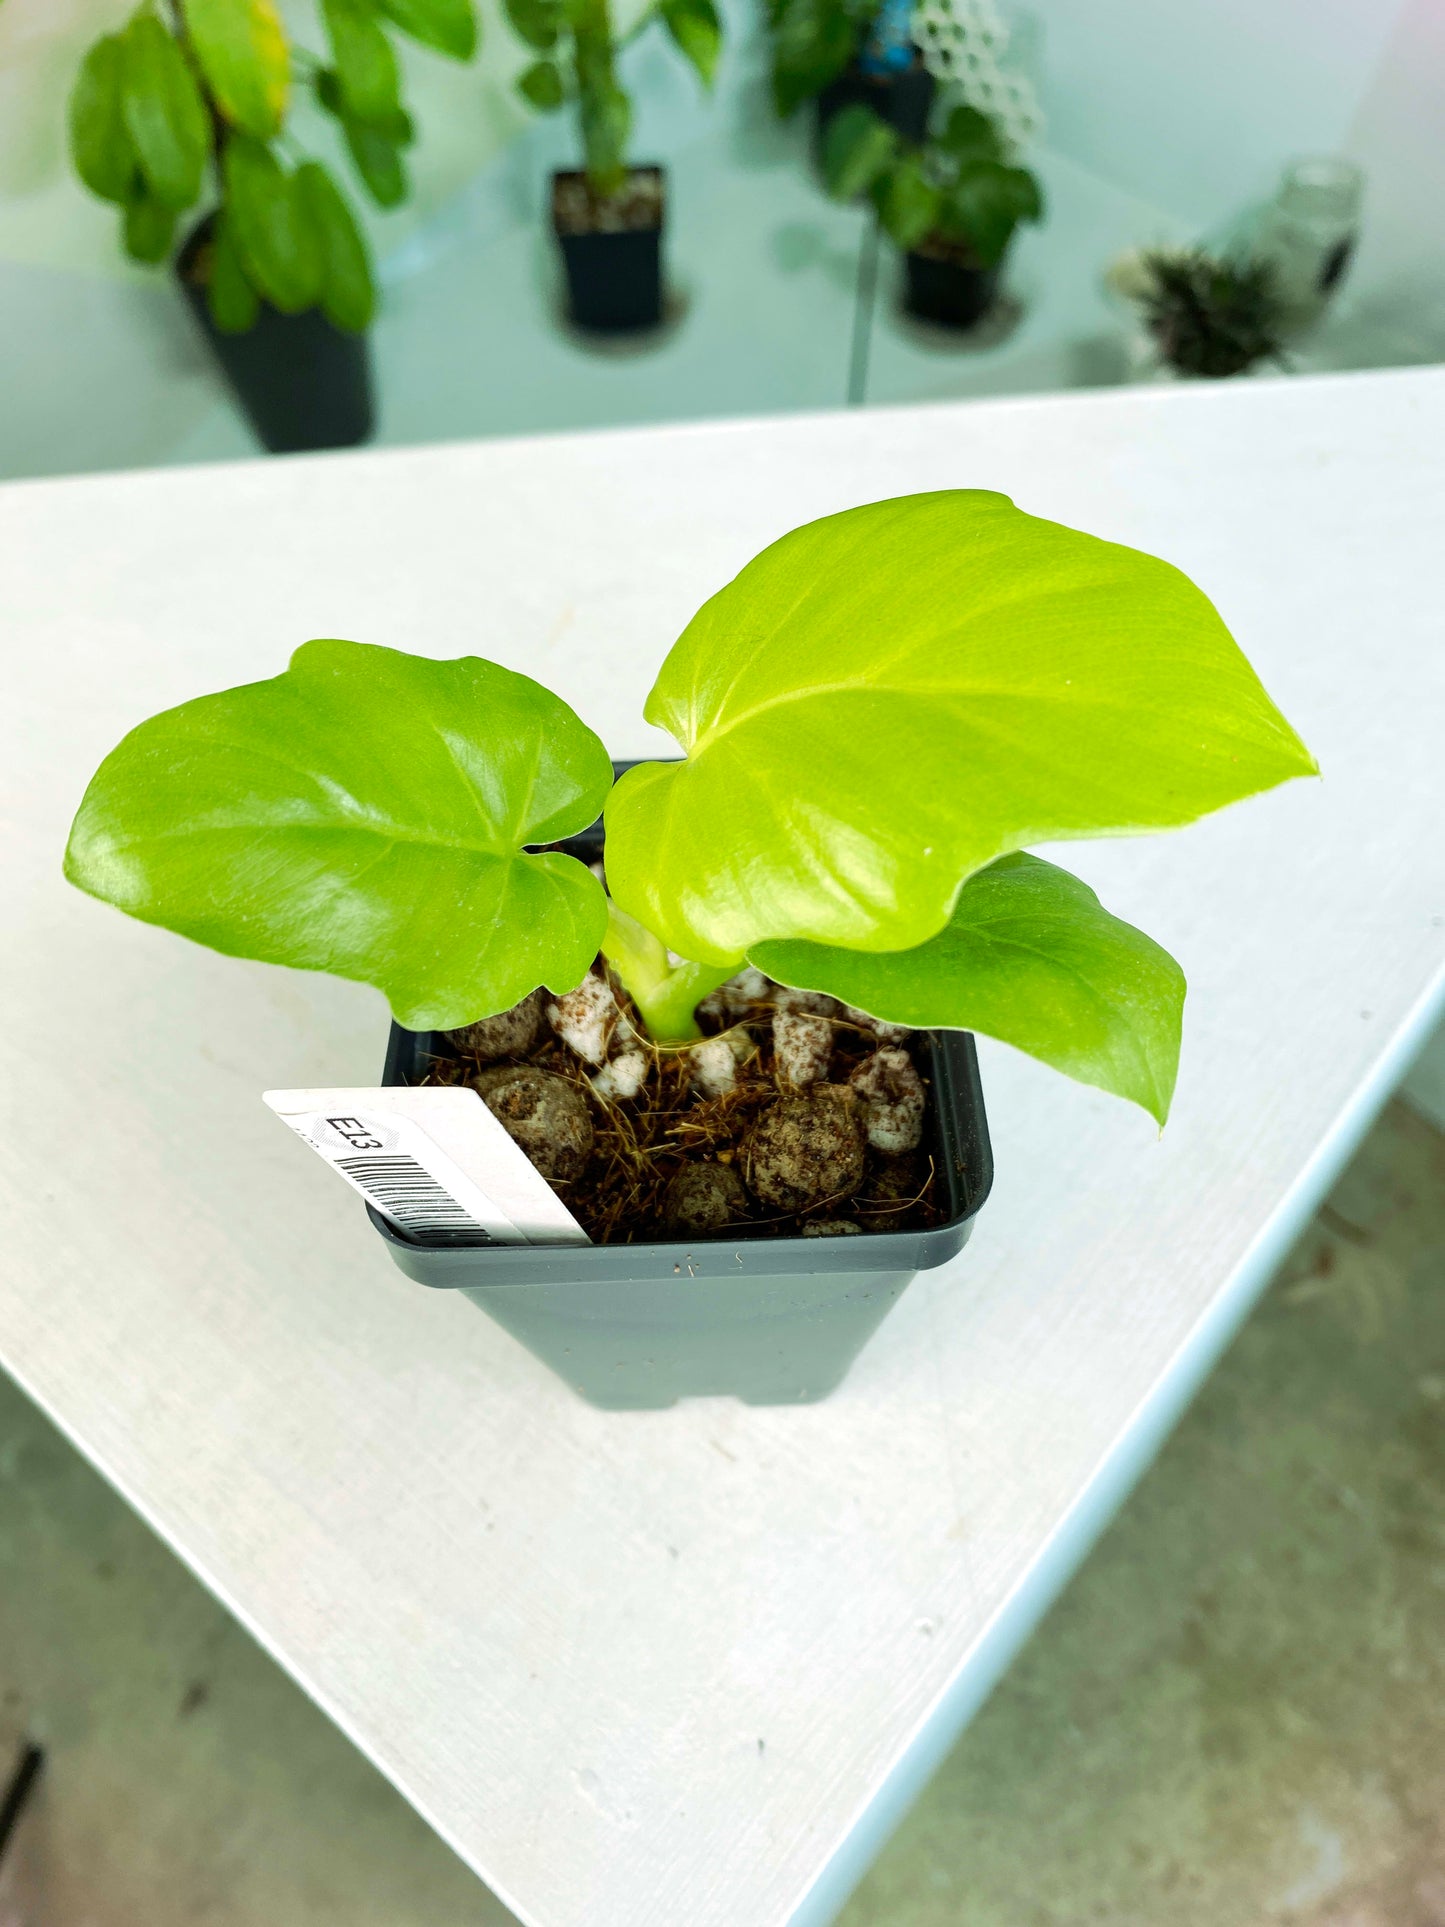 Philodendron warscewiczii "Aurea Flavum" (3:E13) [1122] | US Seller | Exact Plant | In-Stock